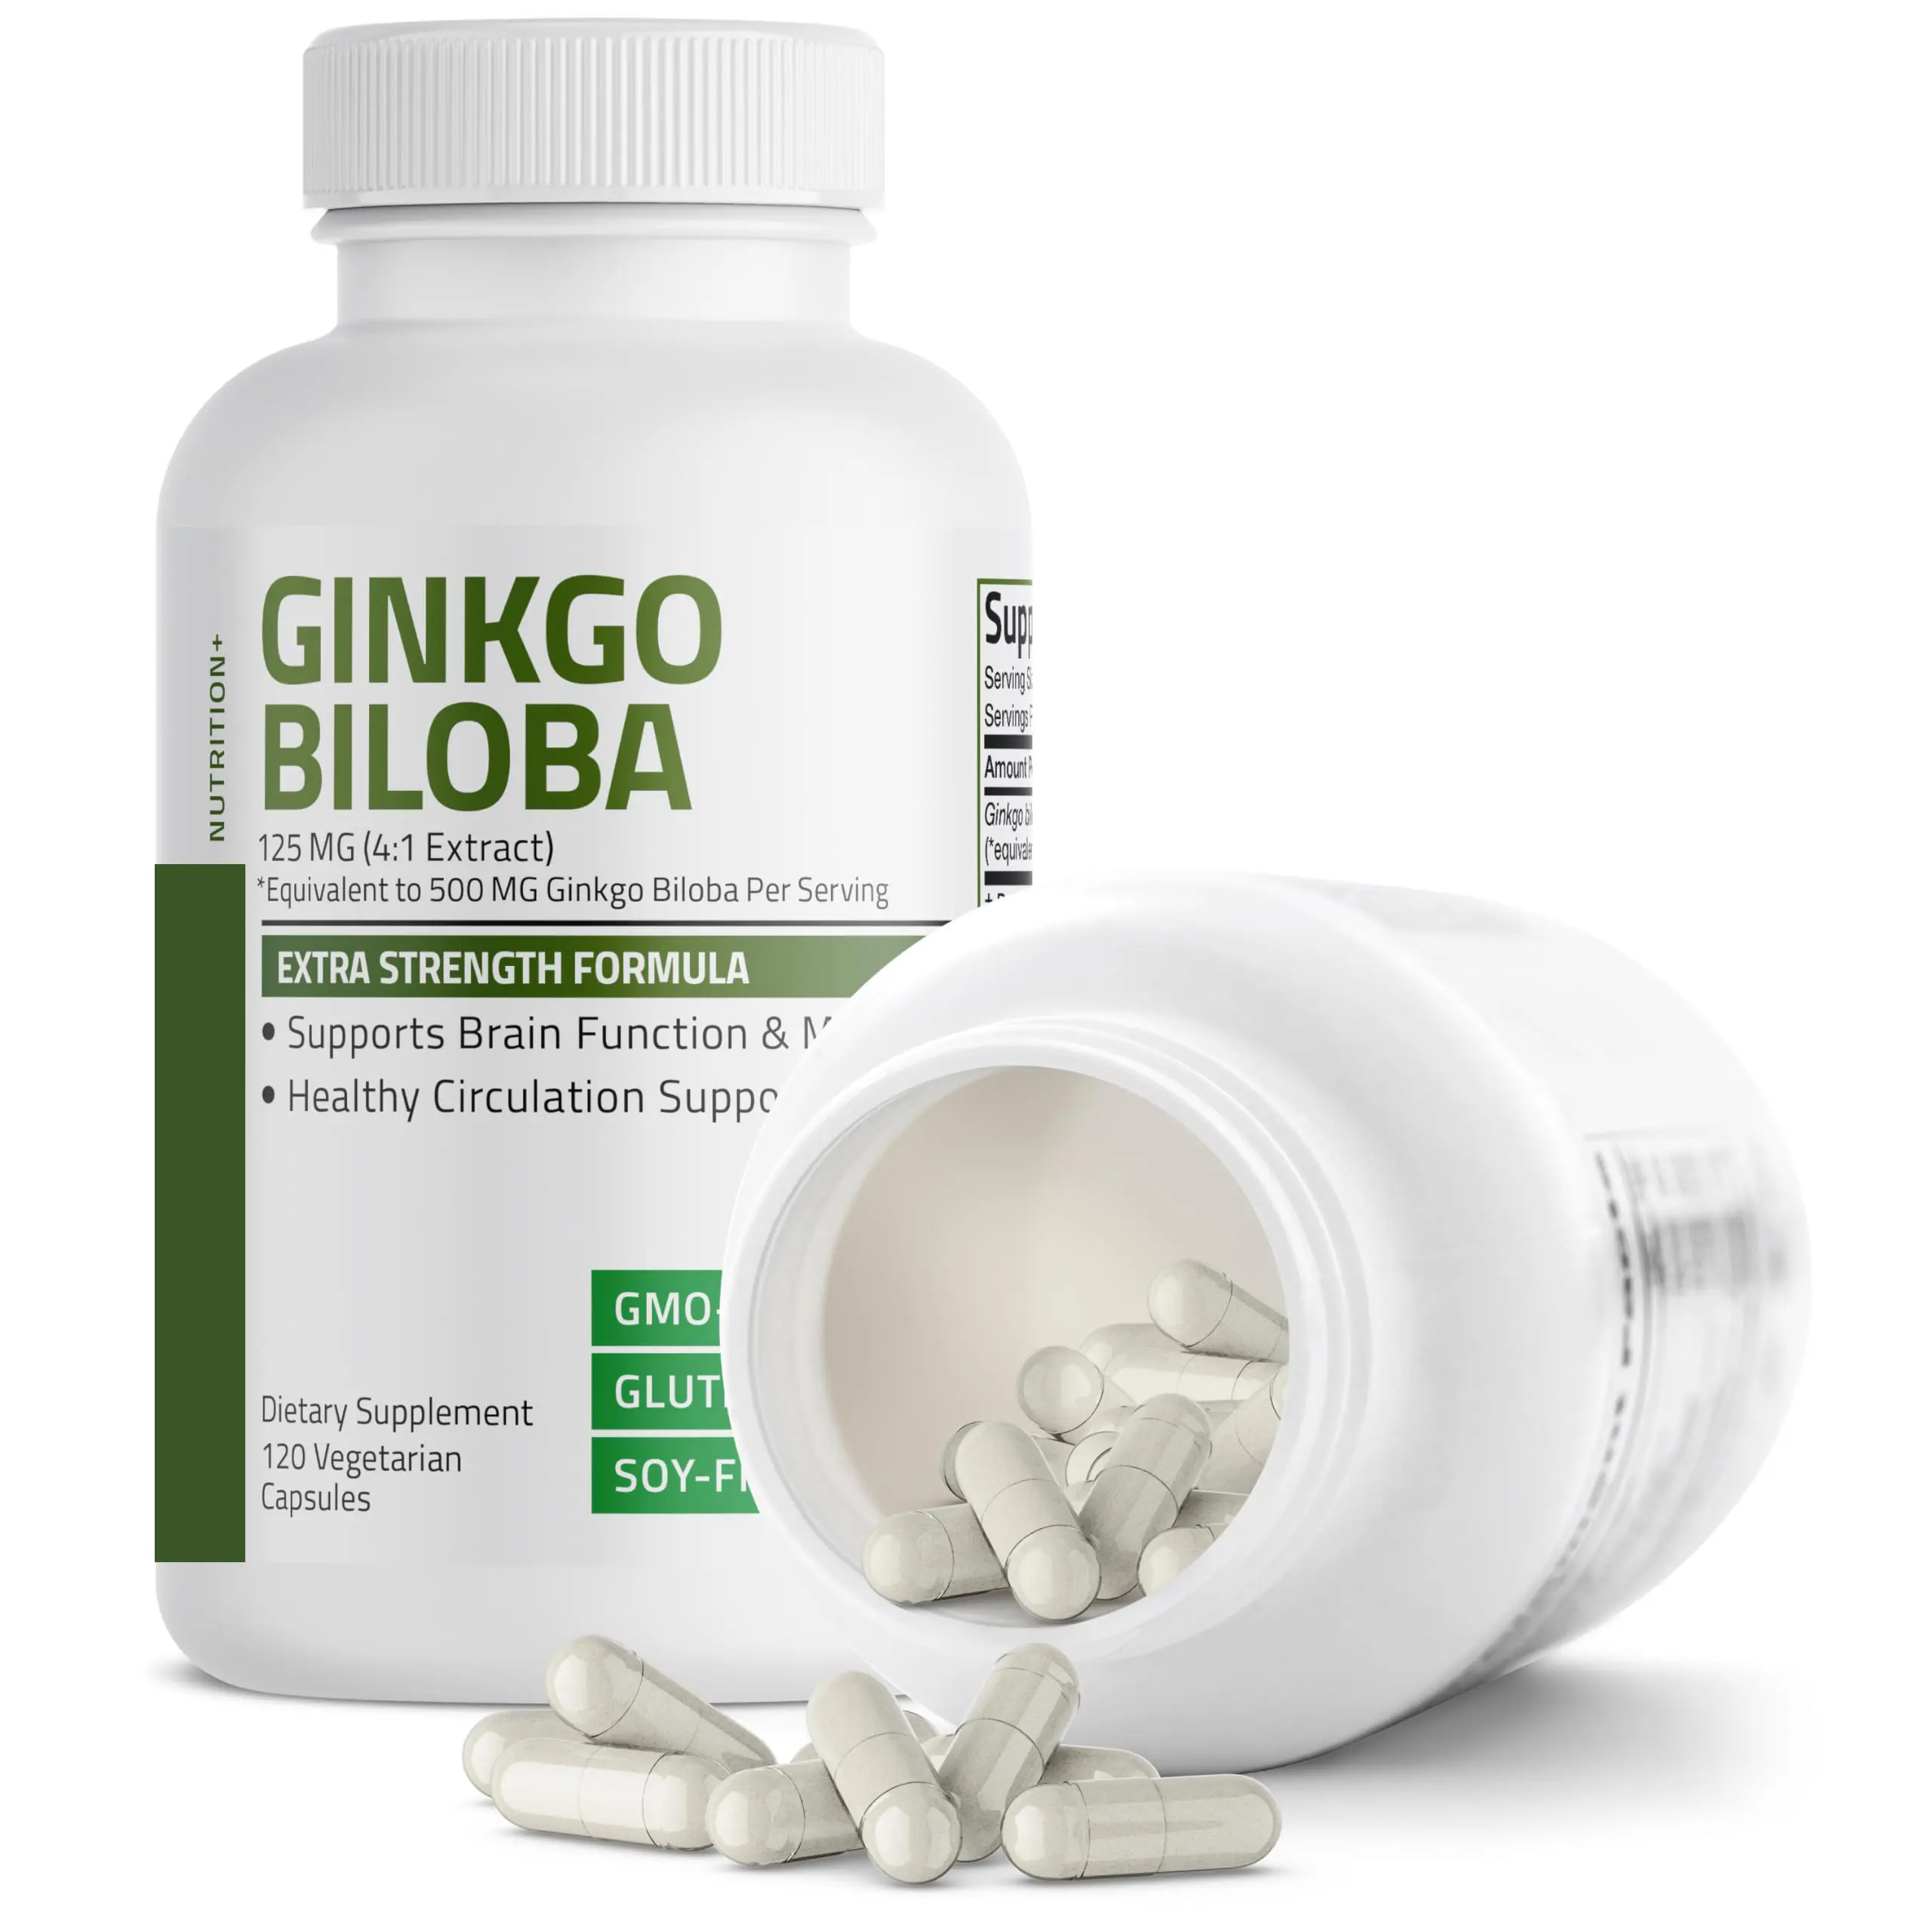 Ginkgo Biloba Capsule For Unsullied GMP Verified and endorsed Gluten-free cuisine Plant-empowered